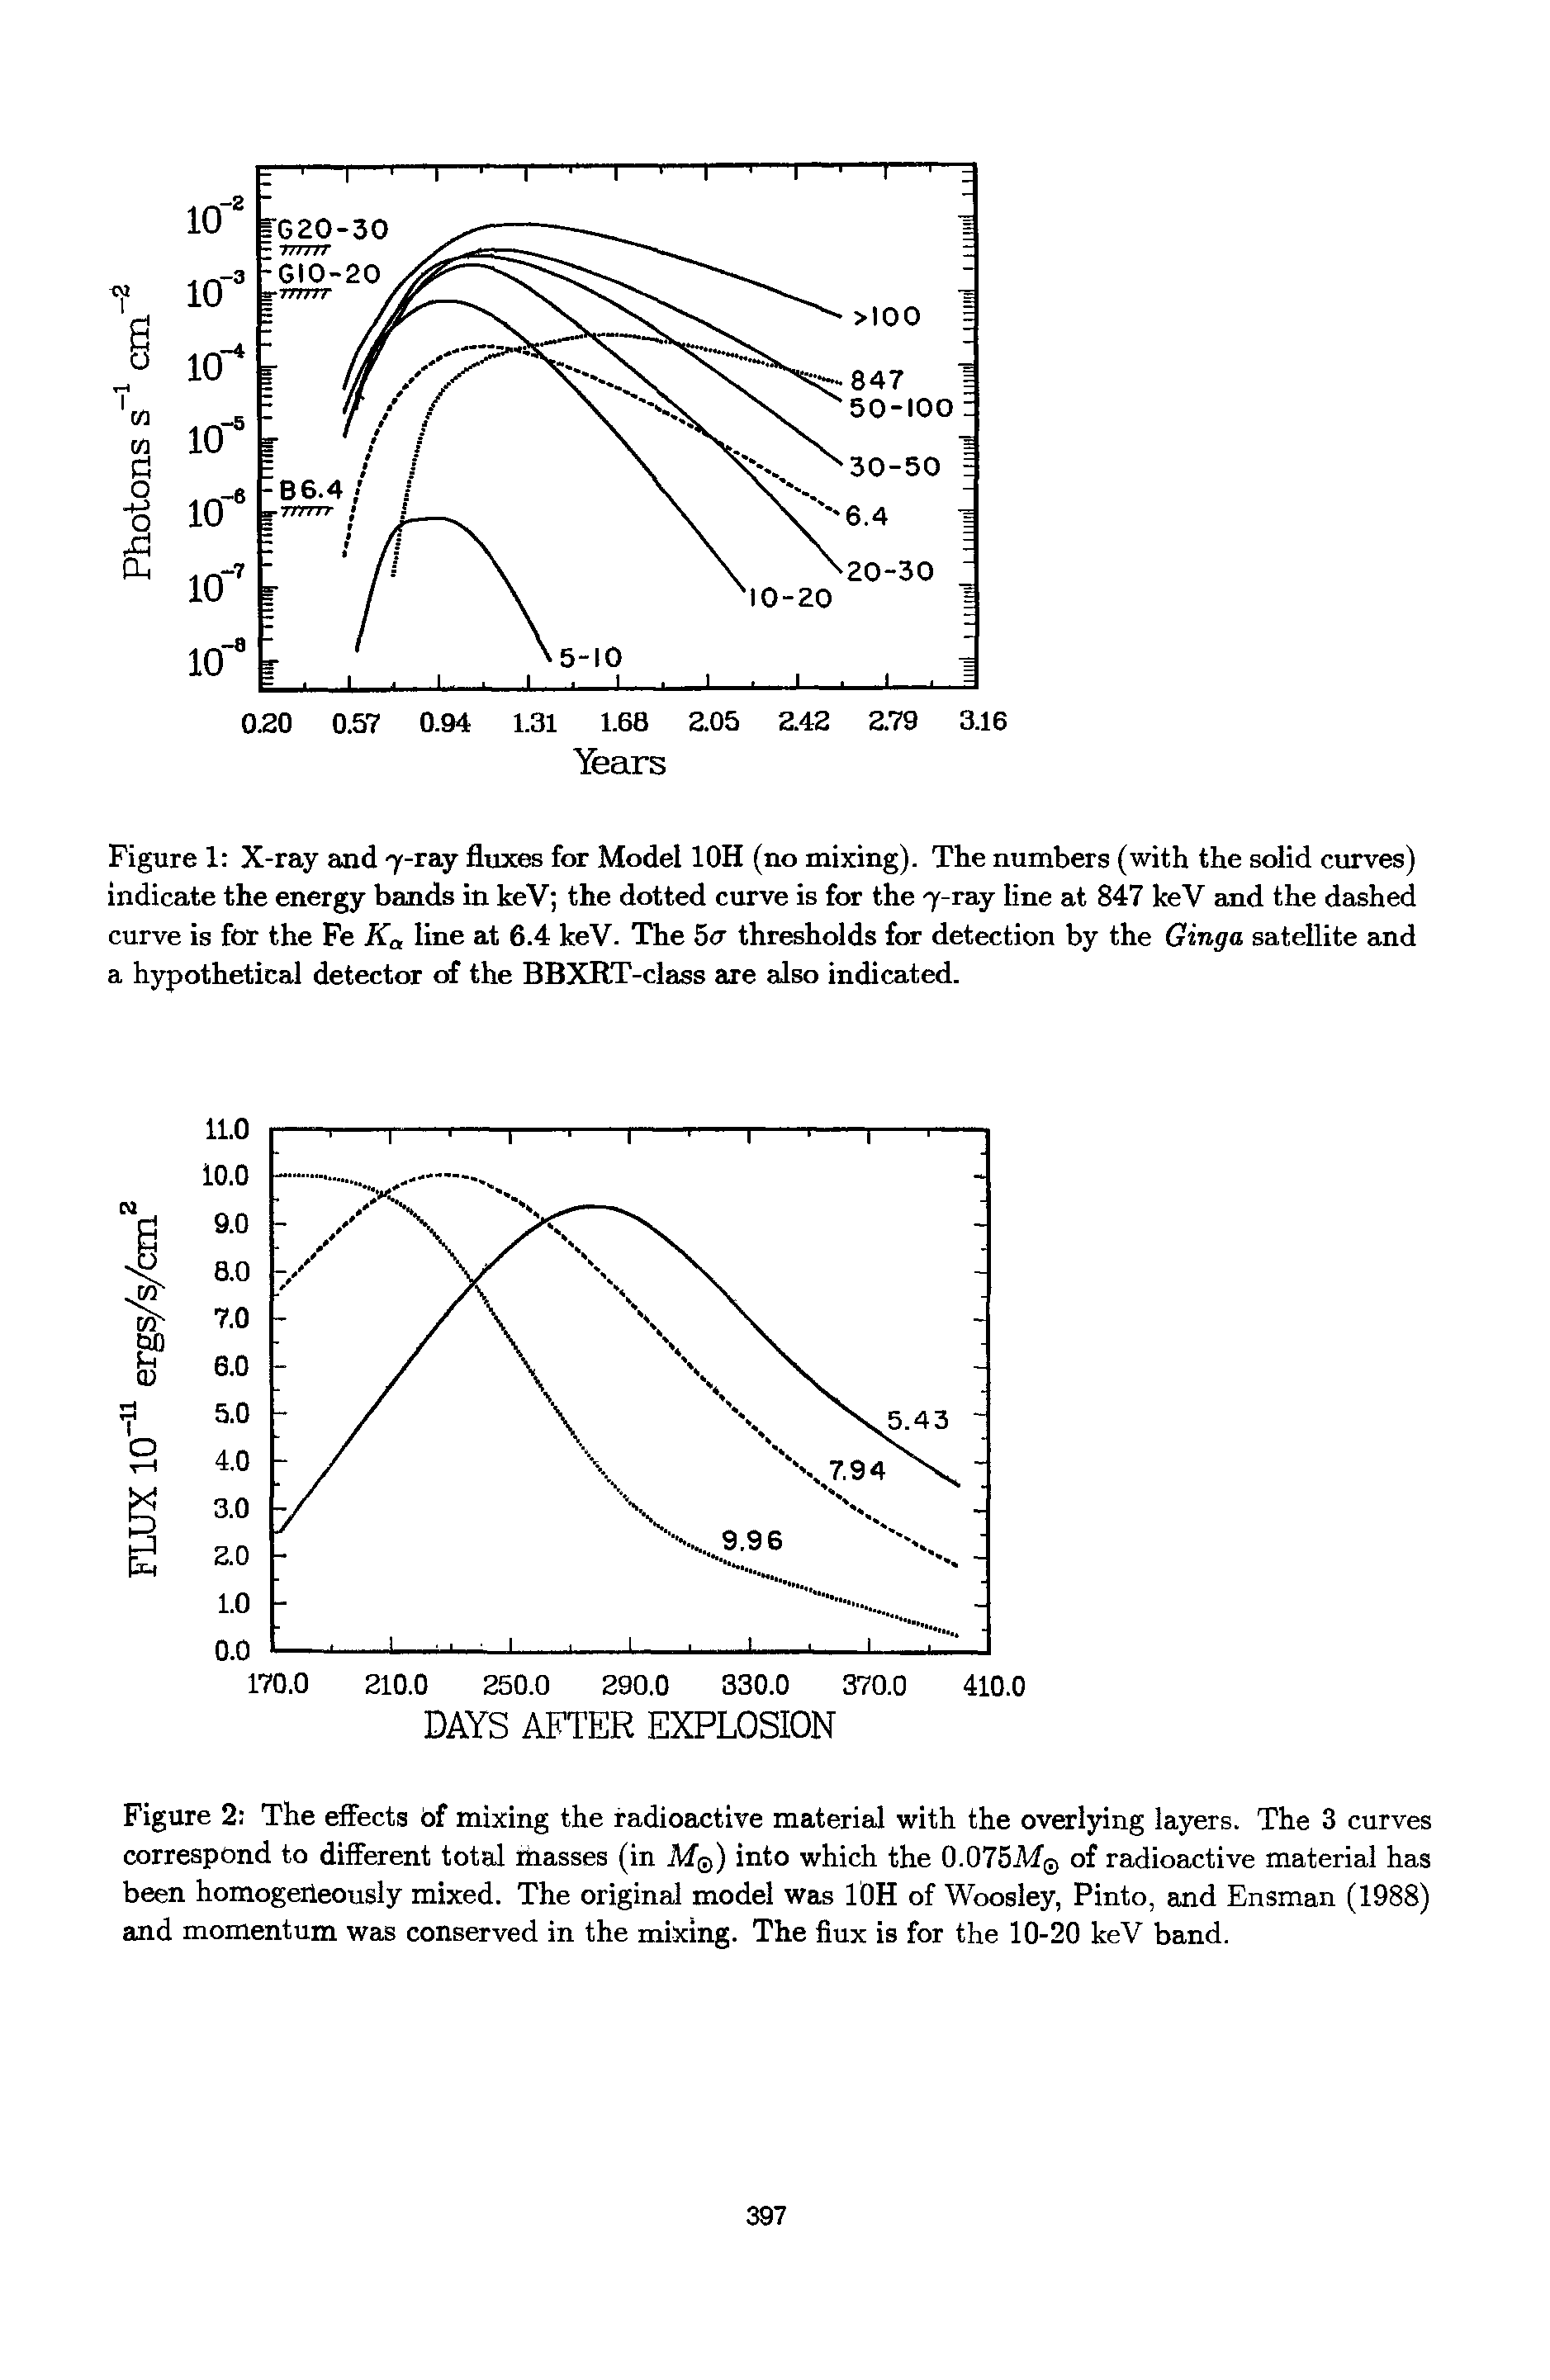 Figure 1 X-ray and 7-ray fluxes for Model 10H (no mixing). The numbers (with the solid curves) indicate the energy bands in keV the dotted curve is for the 7-ray line at 847 keV and the dashed curve is for the Fe Ka line at 6.4 keV. The 5<r thresholds for detection by the Ginga satellite and a hypothetical detector of the BBXRT-class are also indicated.